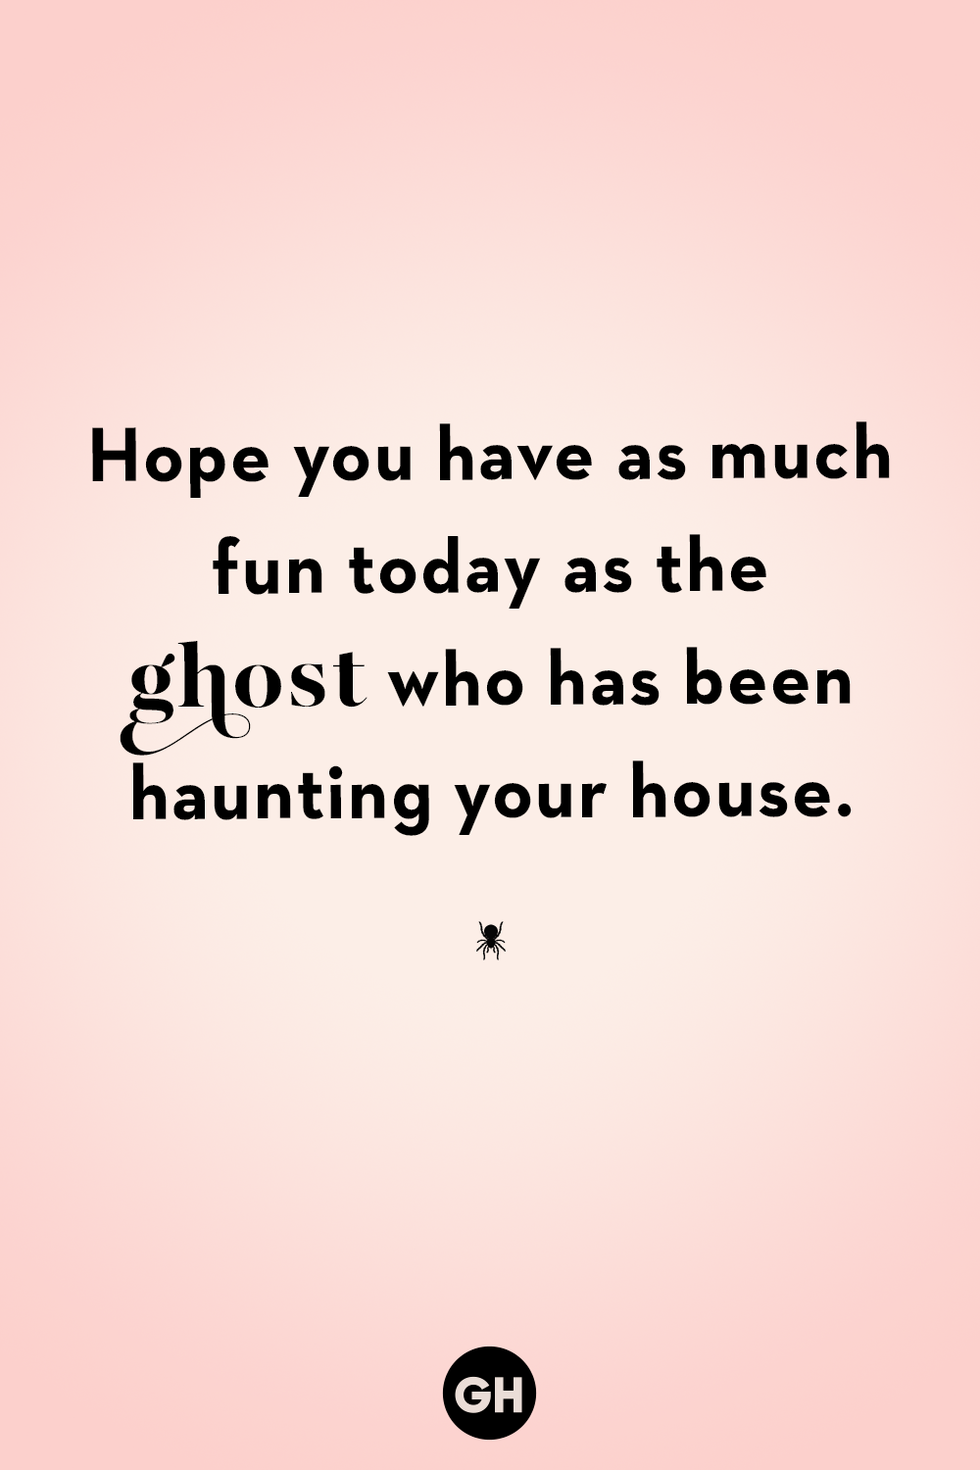 halloween wish about ghost haunting house